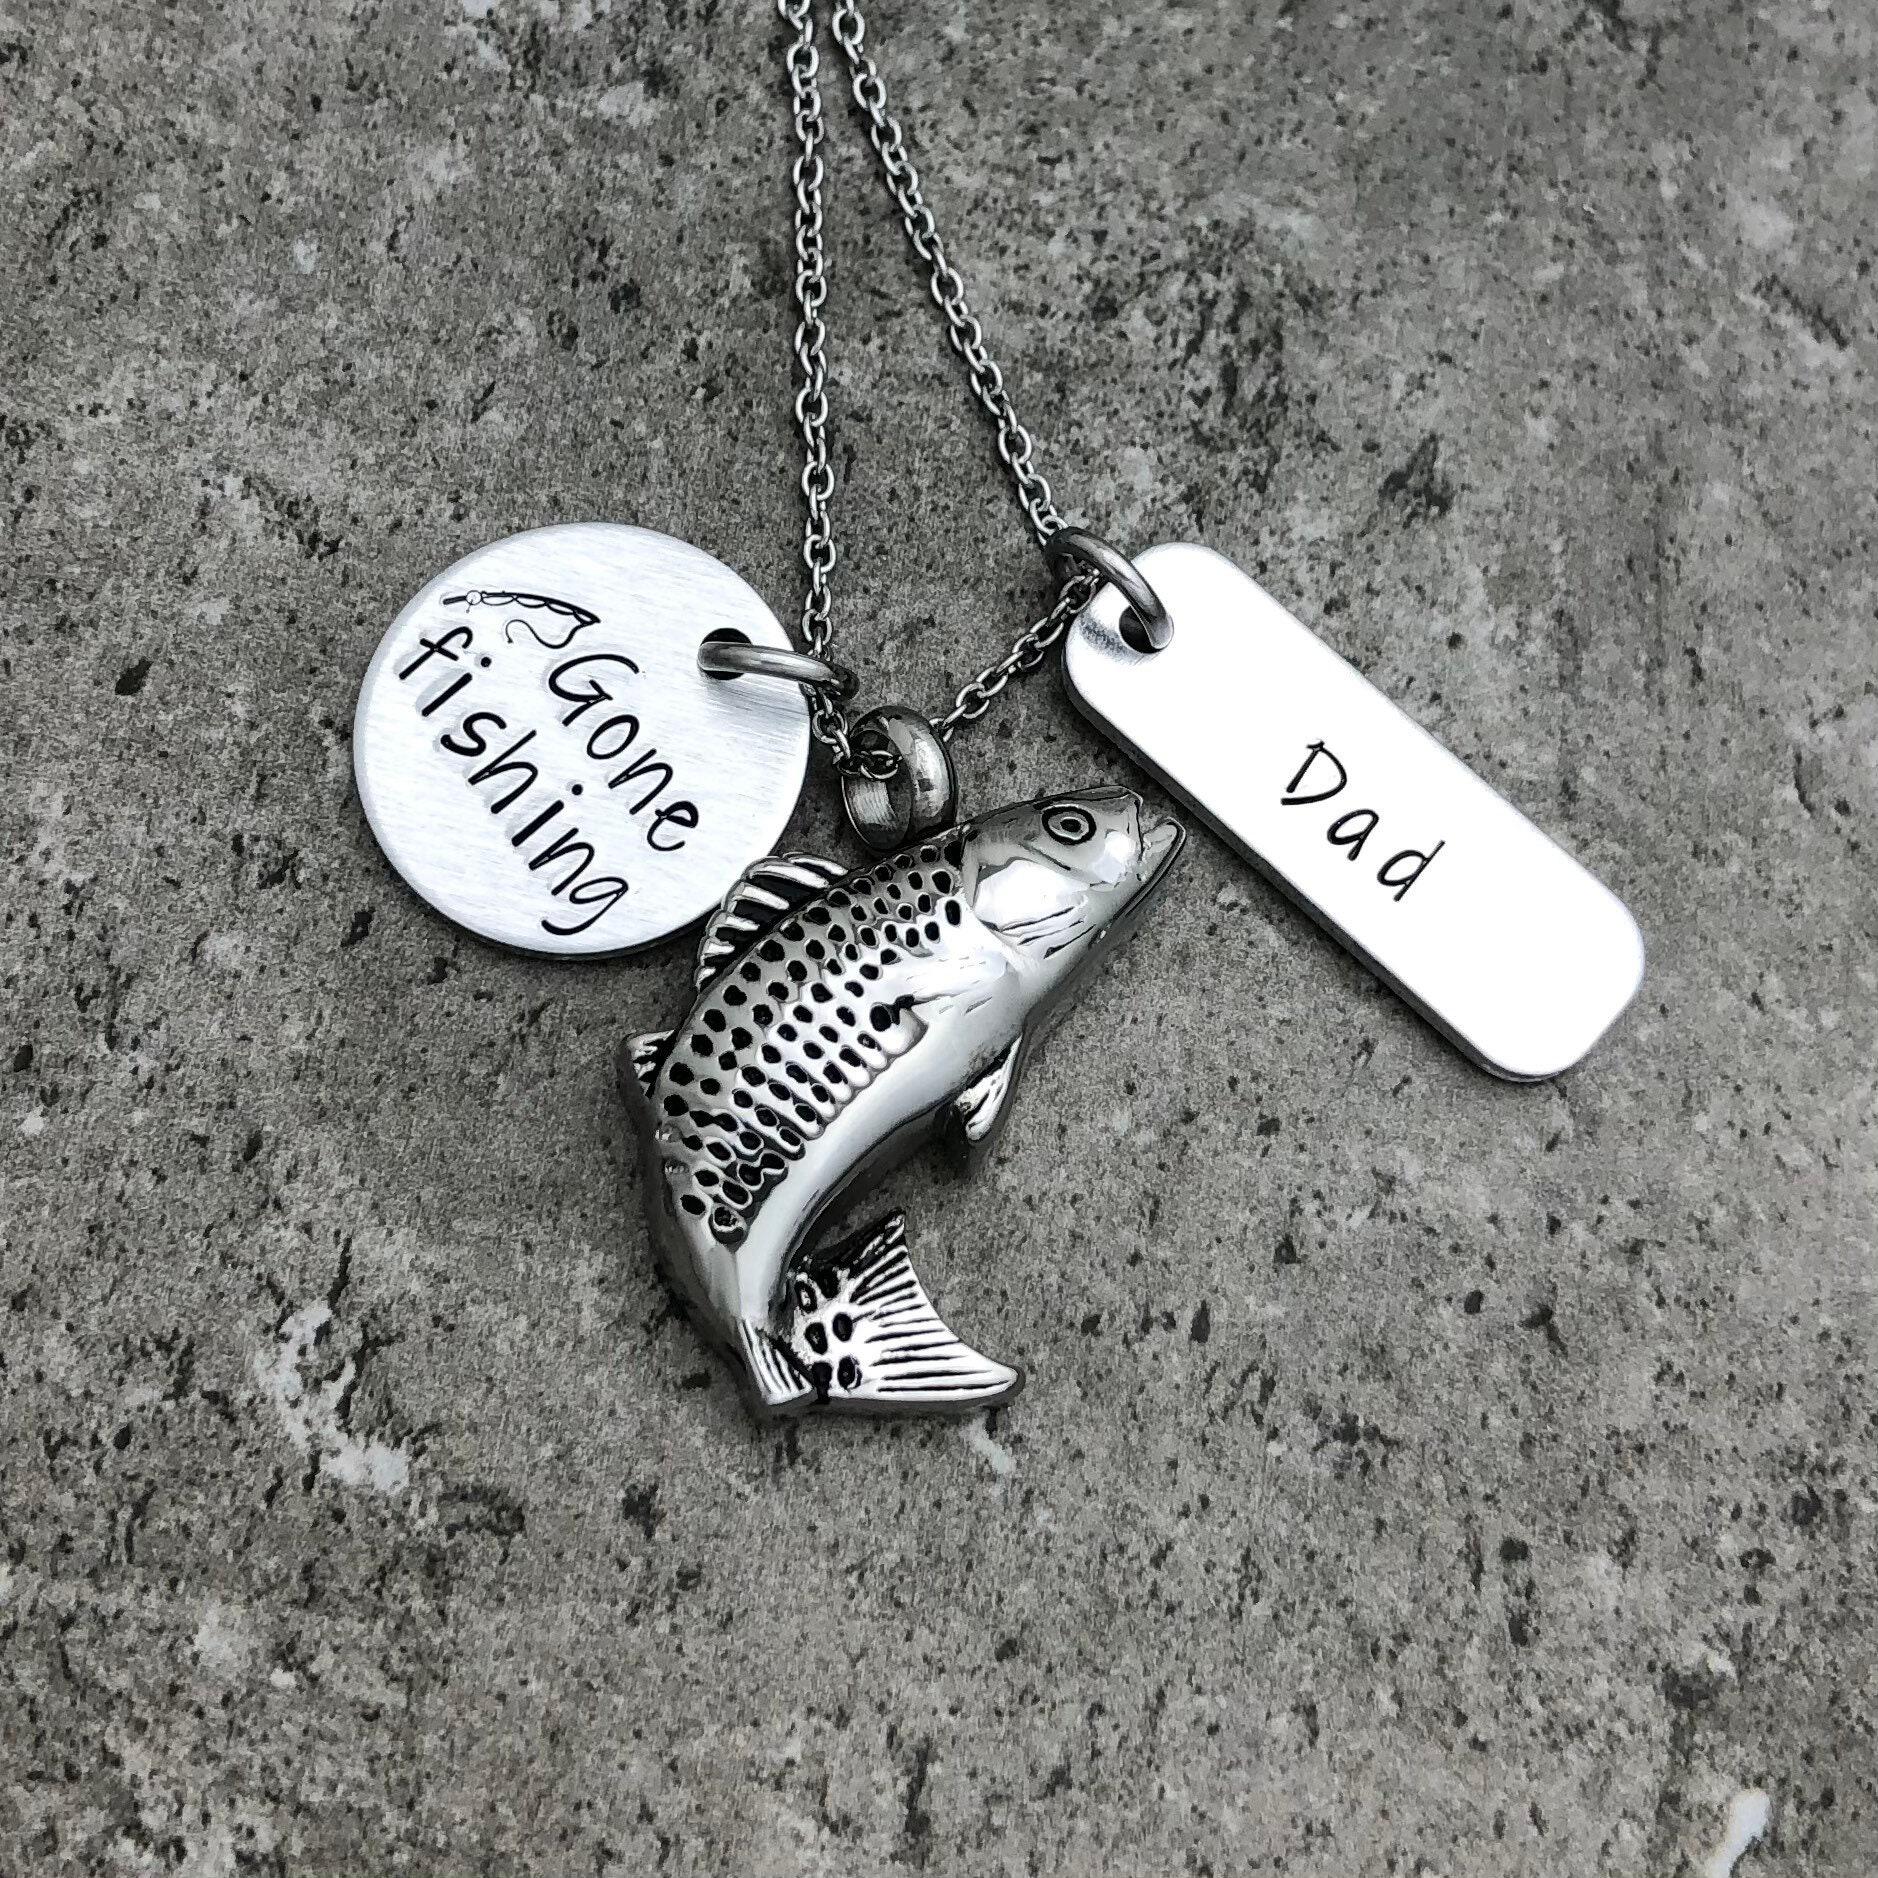 Home & Living :: Religious & Spirituality :: Memorials & Loss :: Gone Fishing  Urn Necklace Personalized Cremation Jewelry Custom Urn Necklace For Ashes  Trout Fisherman Urn Pendant For Human Ashes Cremains